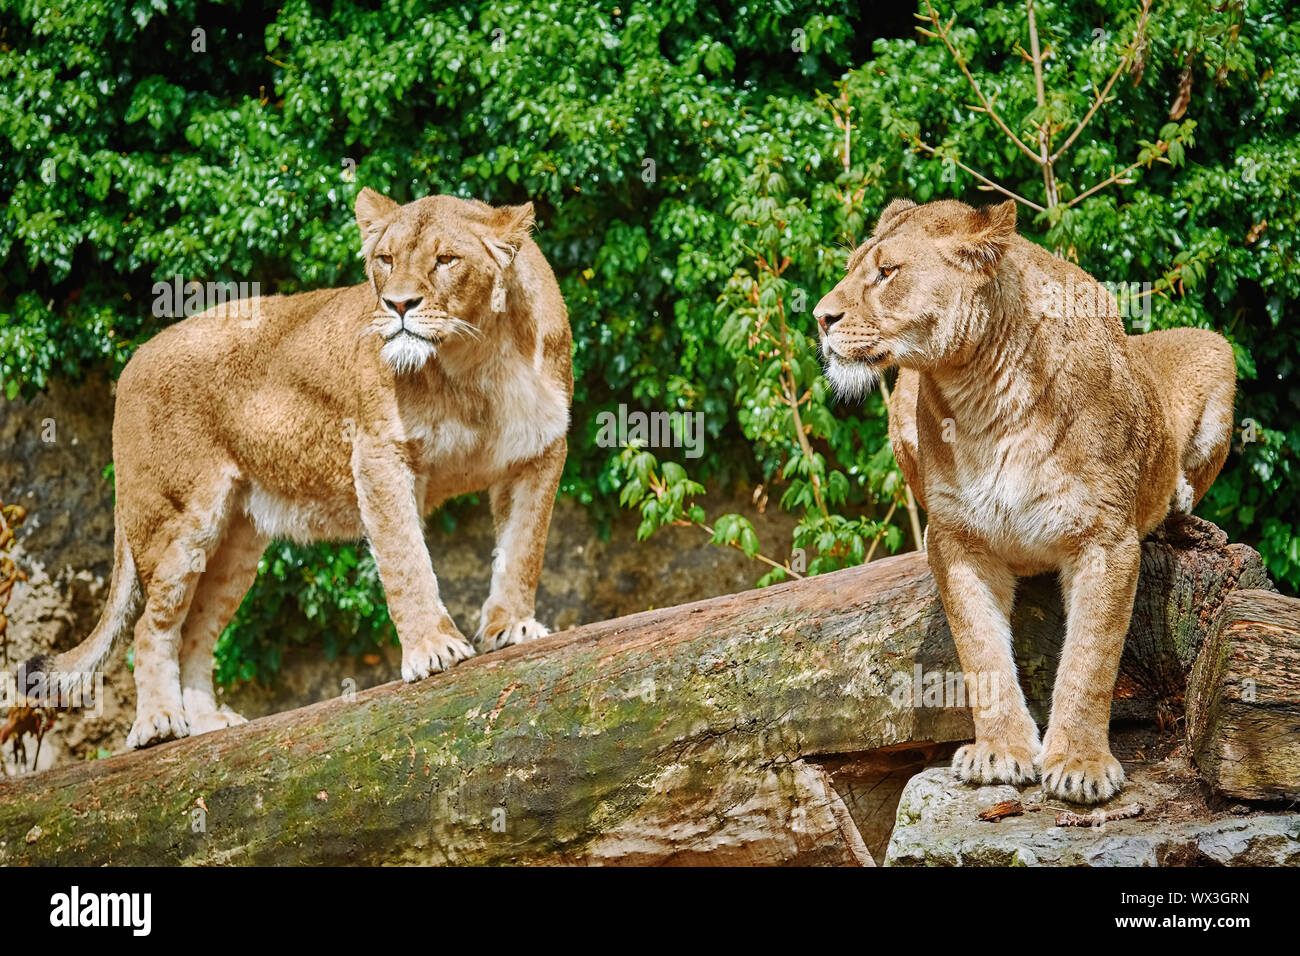 Lionesses on a Log Stock Photo